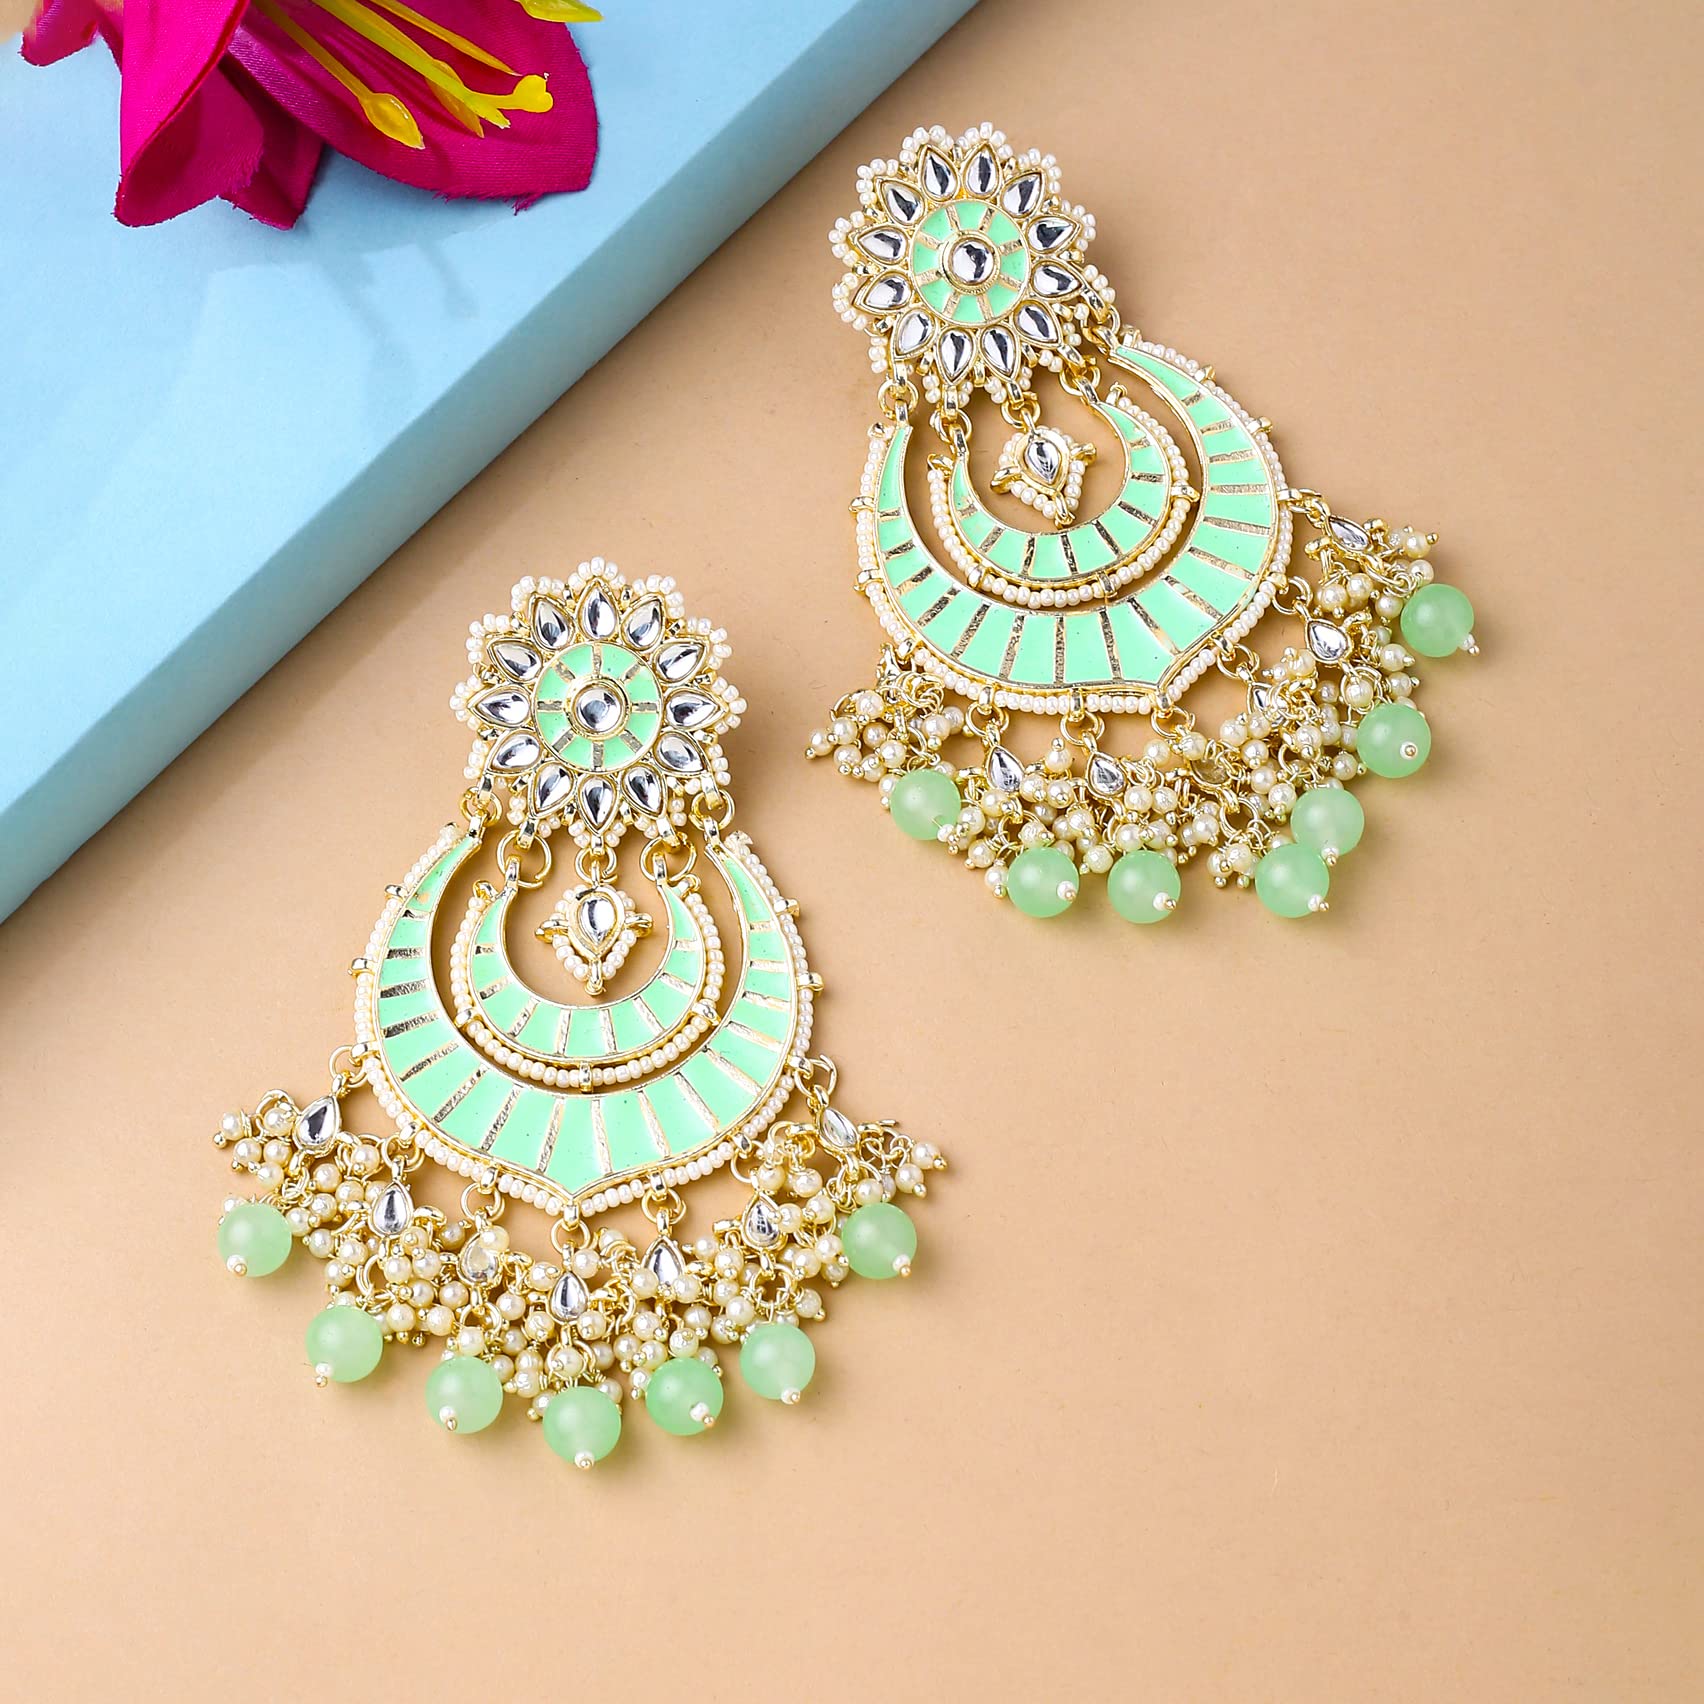 Handcrafted gold plated chandbali earrings – Chaotiq by Arti